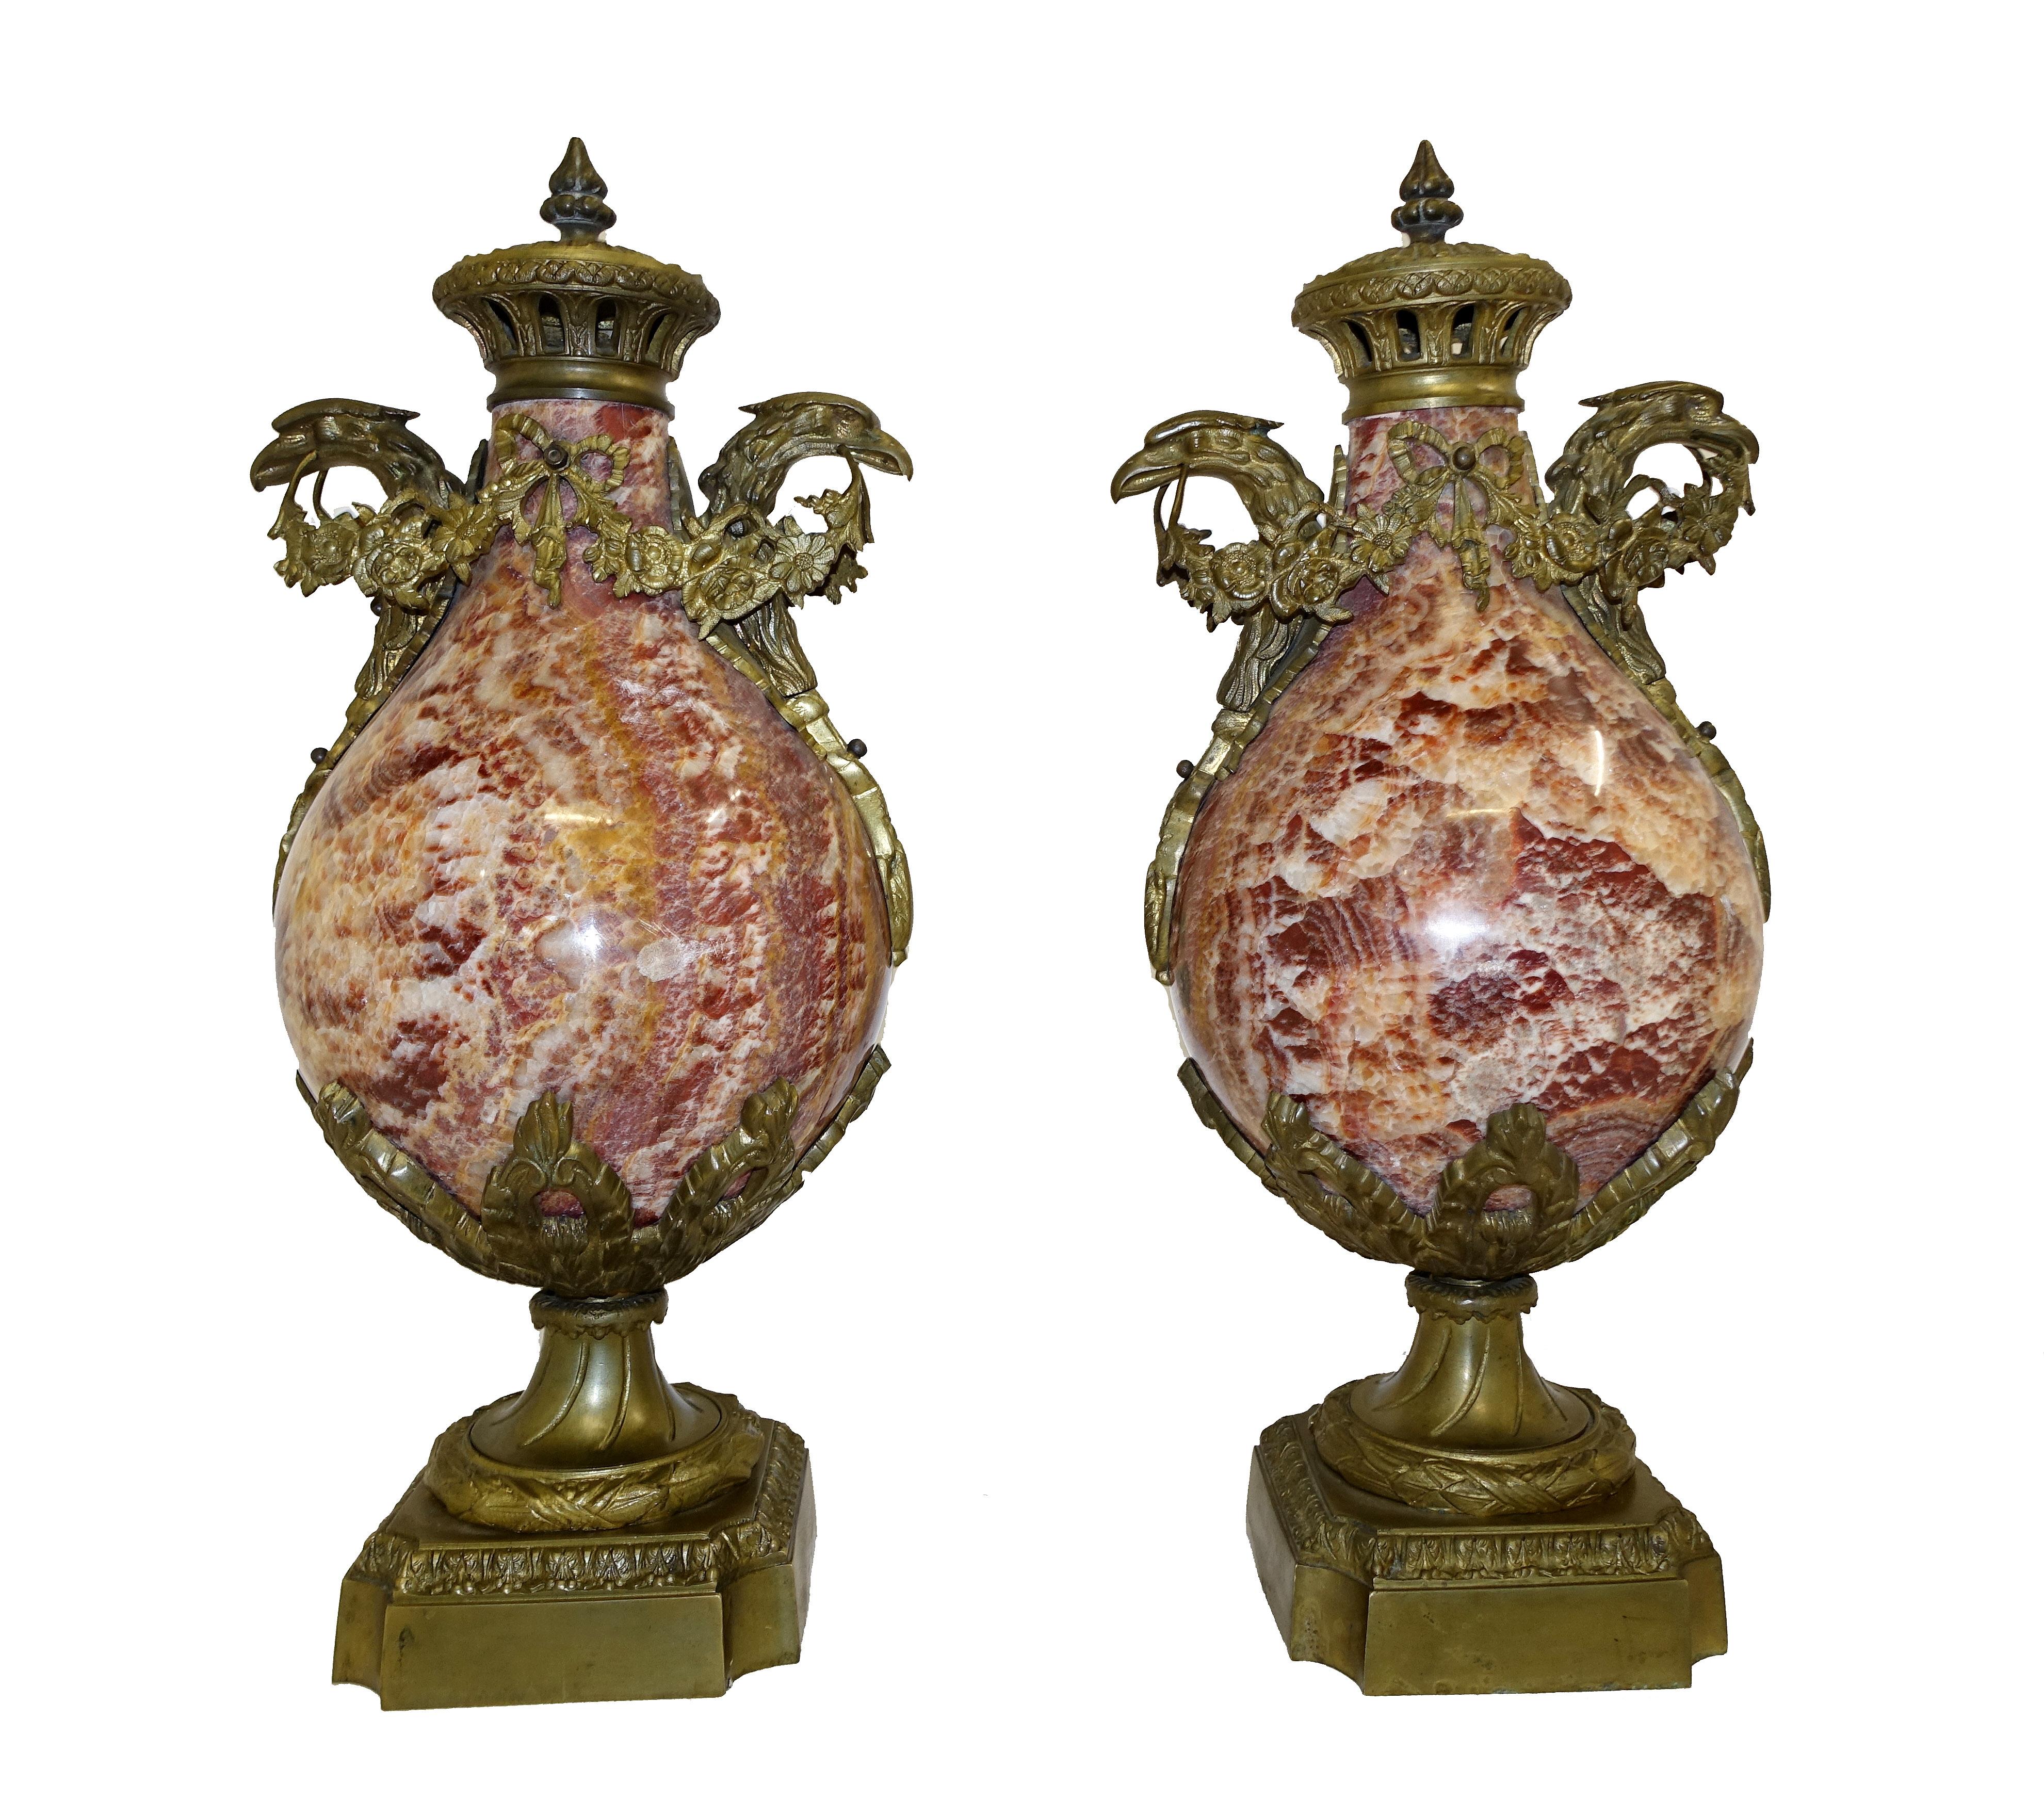 Elegant pair of antique marble urns - or cassolettes
Great bulbous form to the body of the urn
Love the colour scheme with burnt orange, deep reds and ochre to gorgeous affect
Ormolu fixtures all original including birds head handles Stand out pair